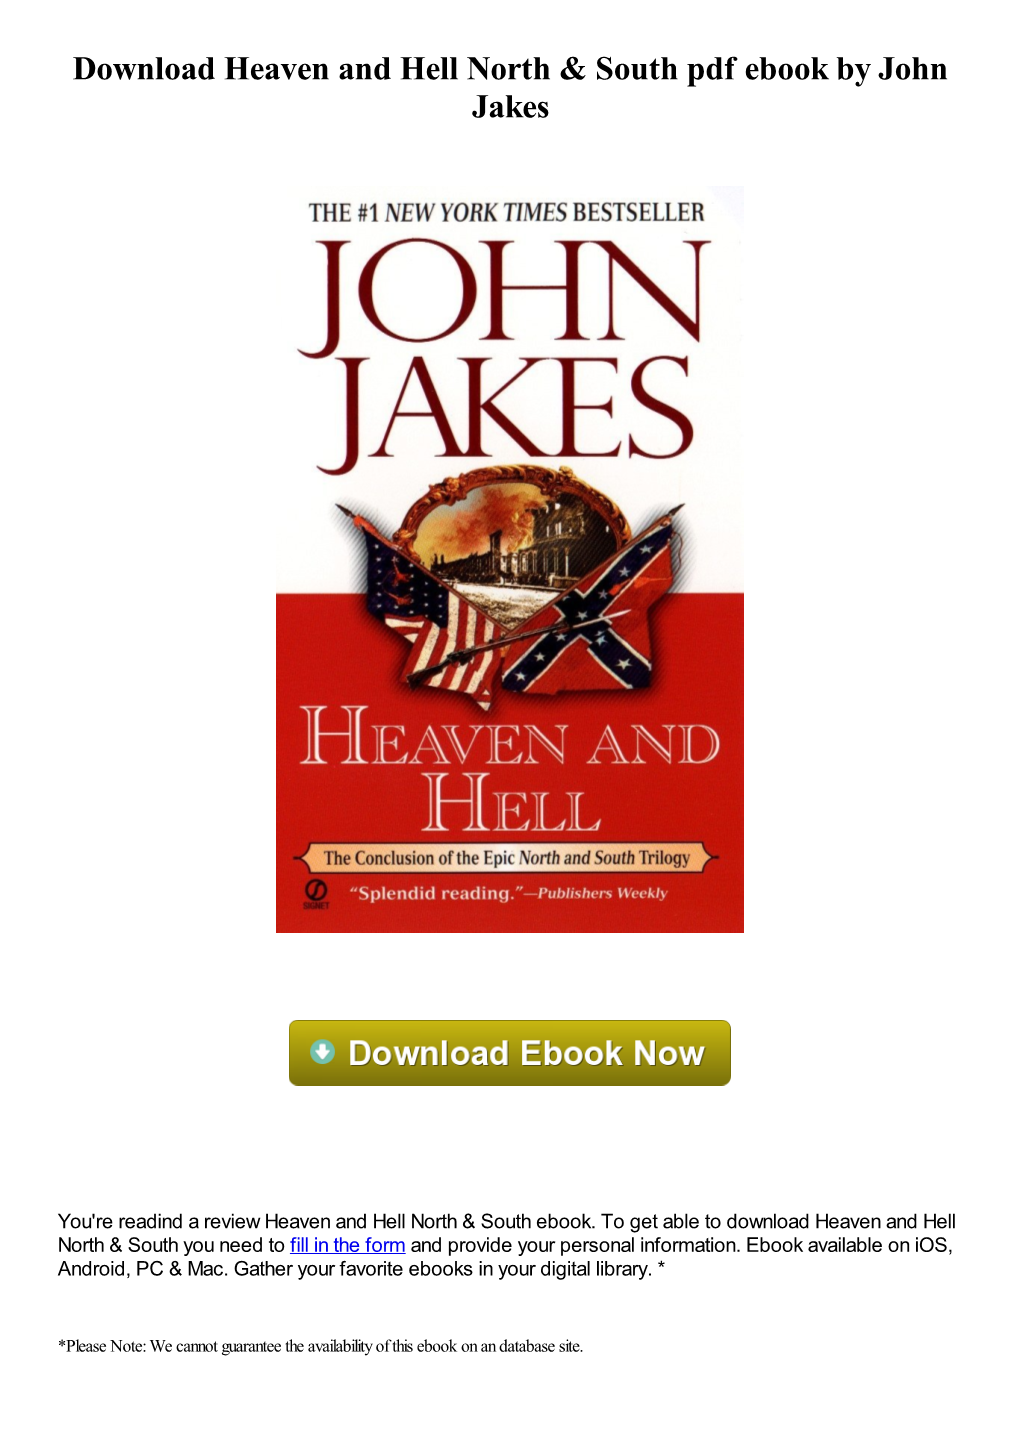 Download Heaven and Hell North & South Pdf Ebook by John Jakes